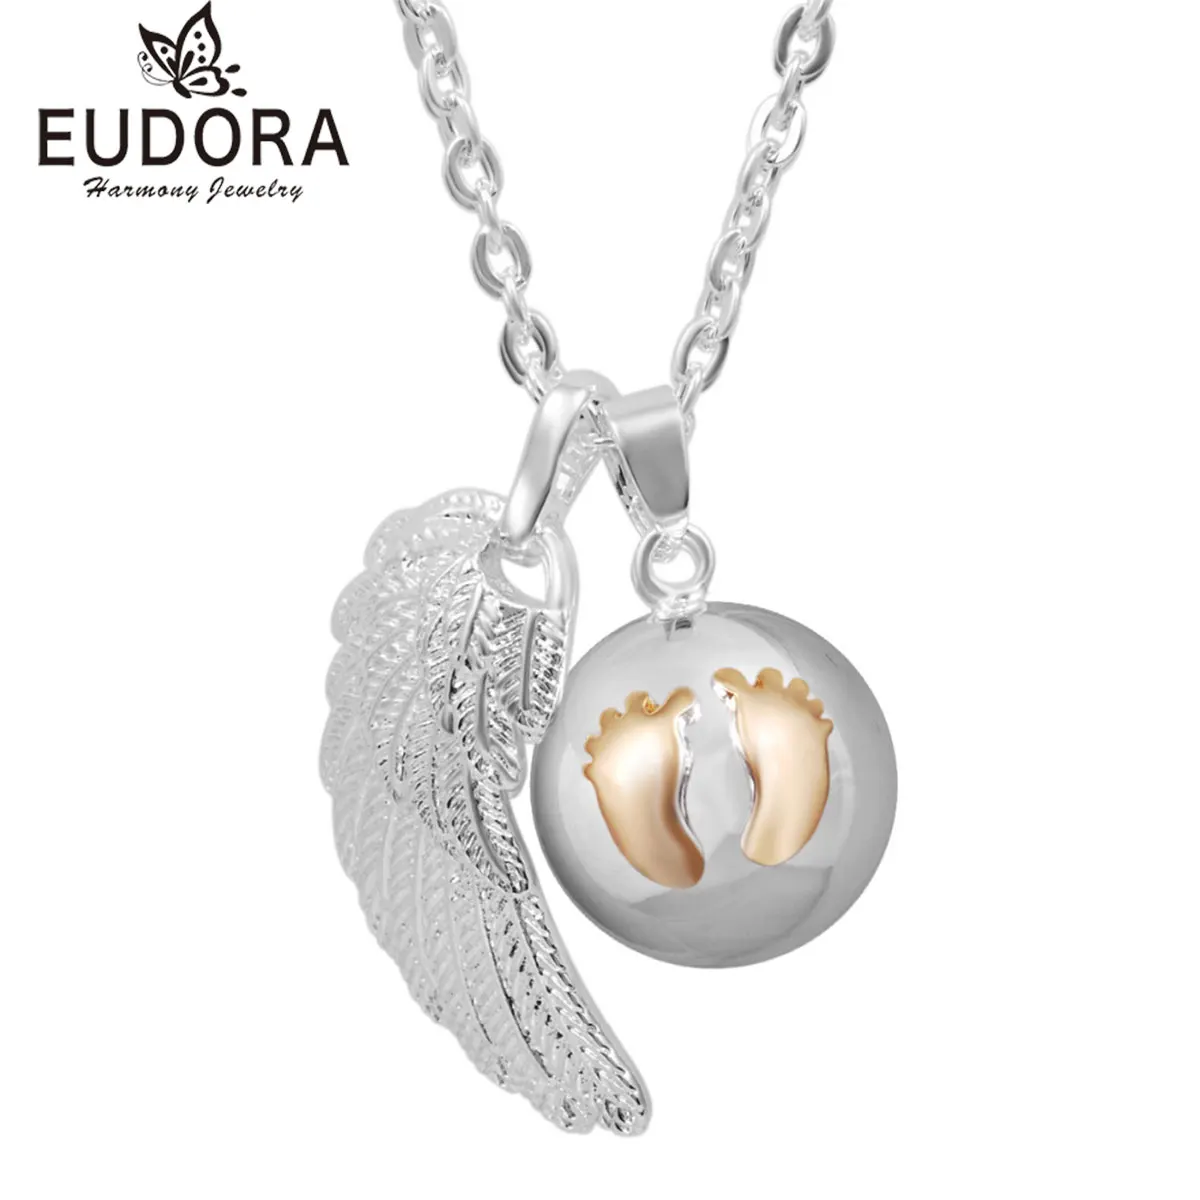 Angel Wing Baby Feet Mexican Bola Ball Pregnancy Pendant Baby Angel Caller Sounds Chime Bell Necklace Women Baby Pretty Gift